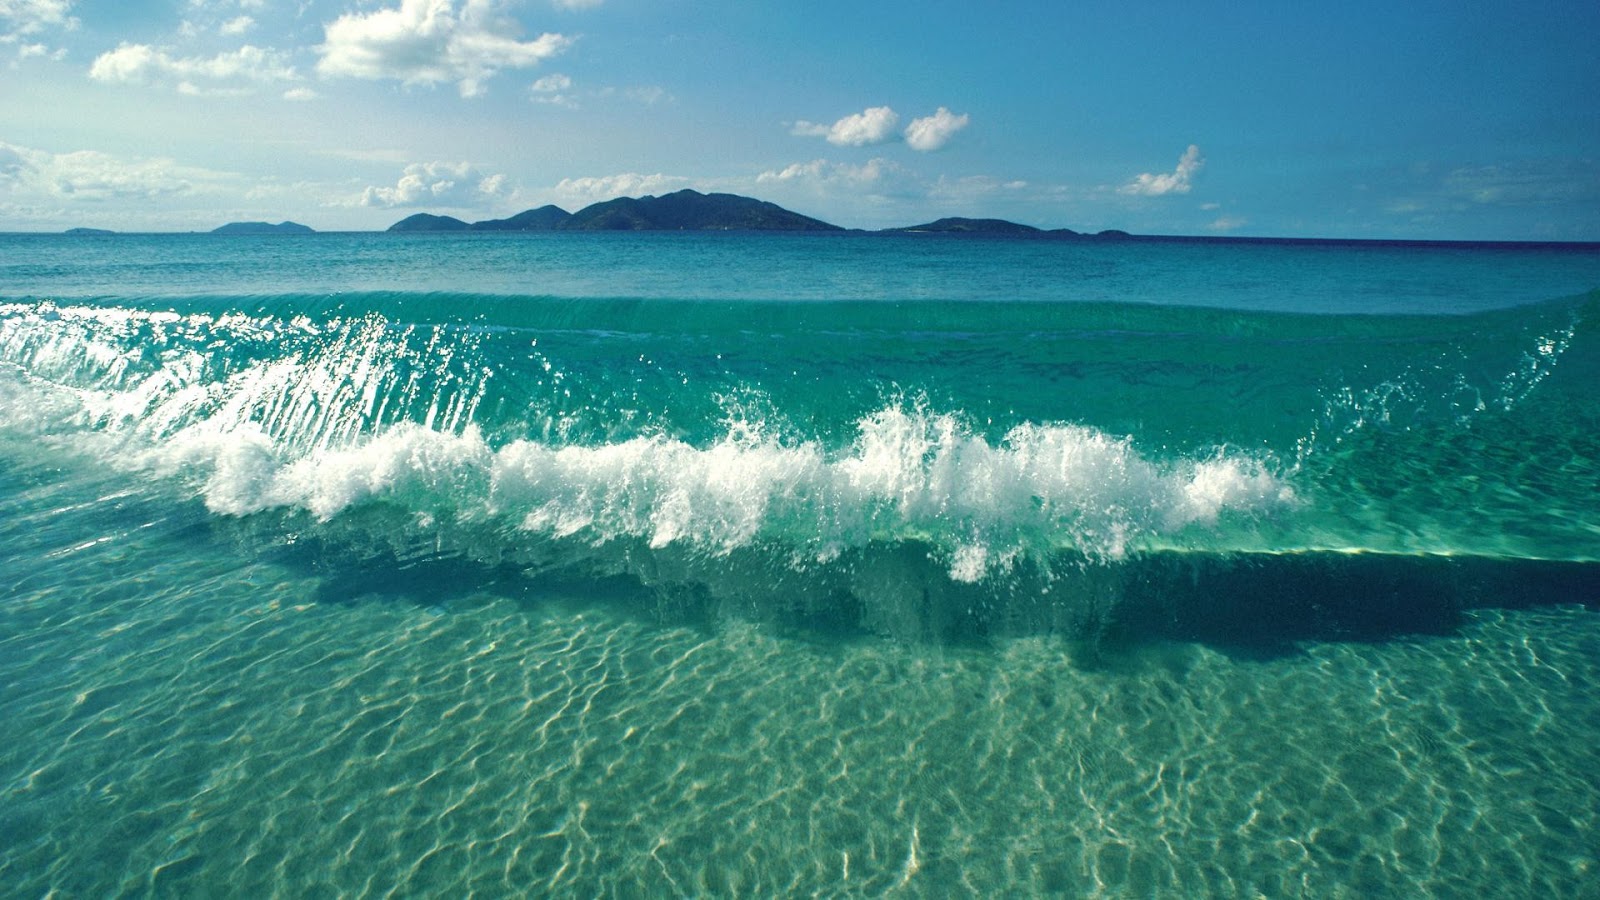 Ocean Waves Wallpaper S Powerful Big In The Blue Showing